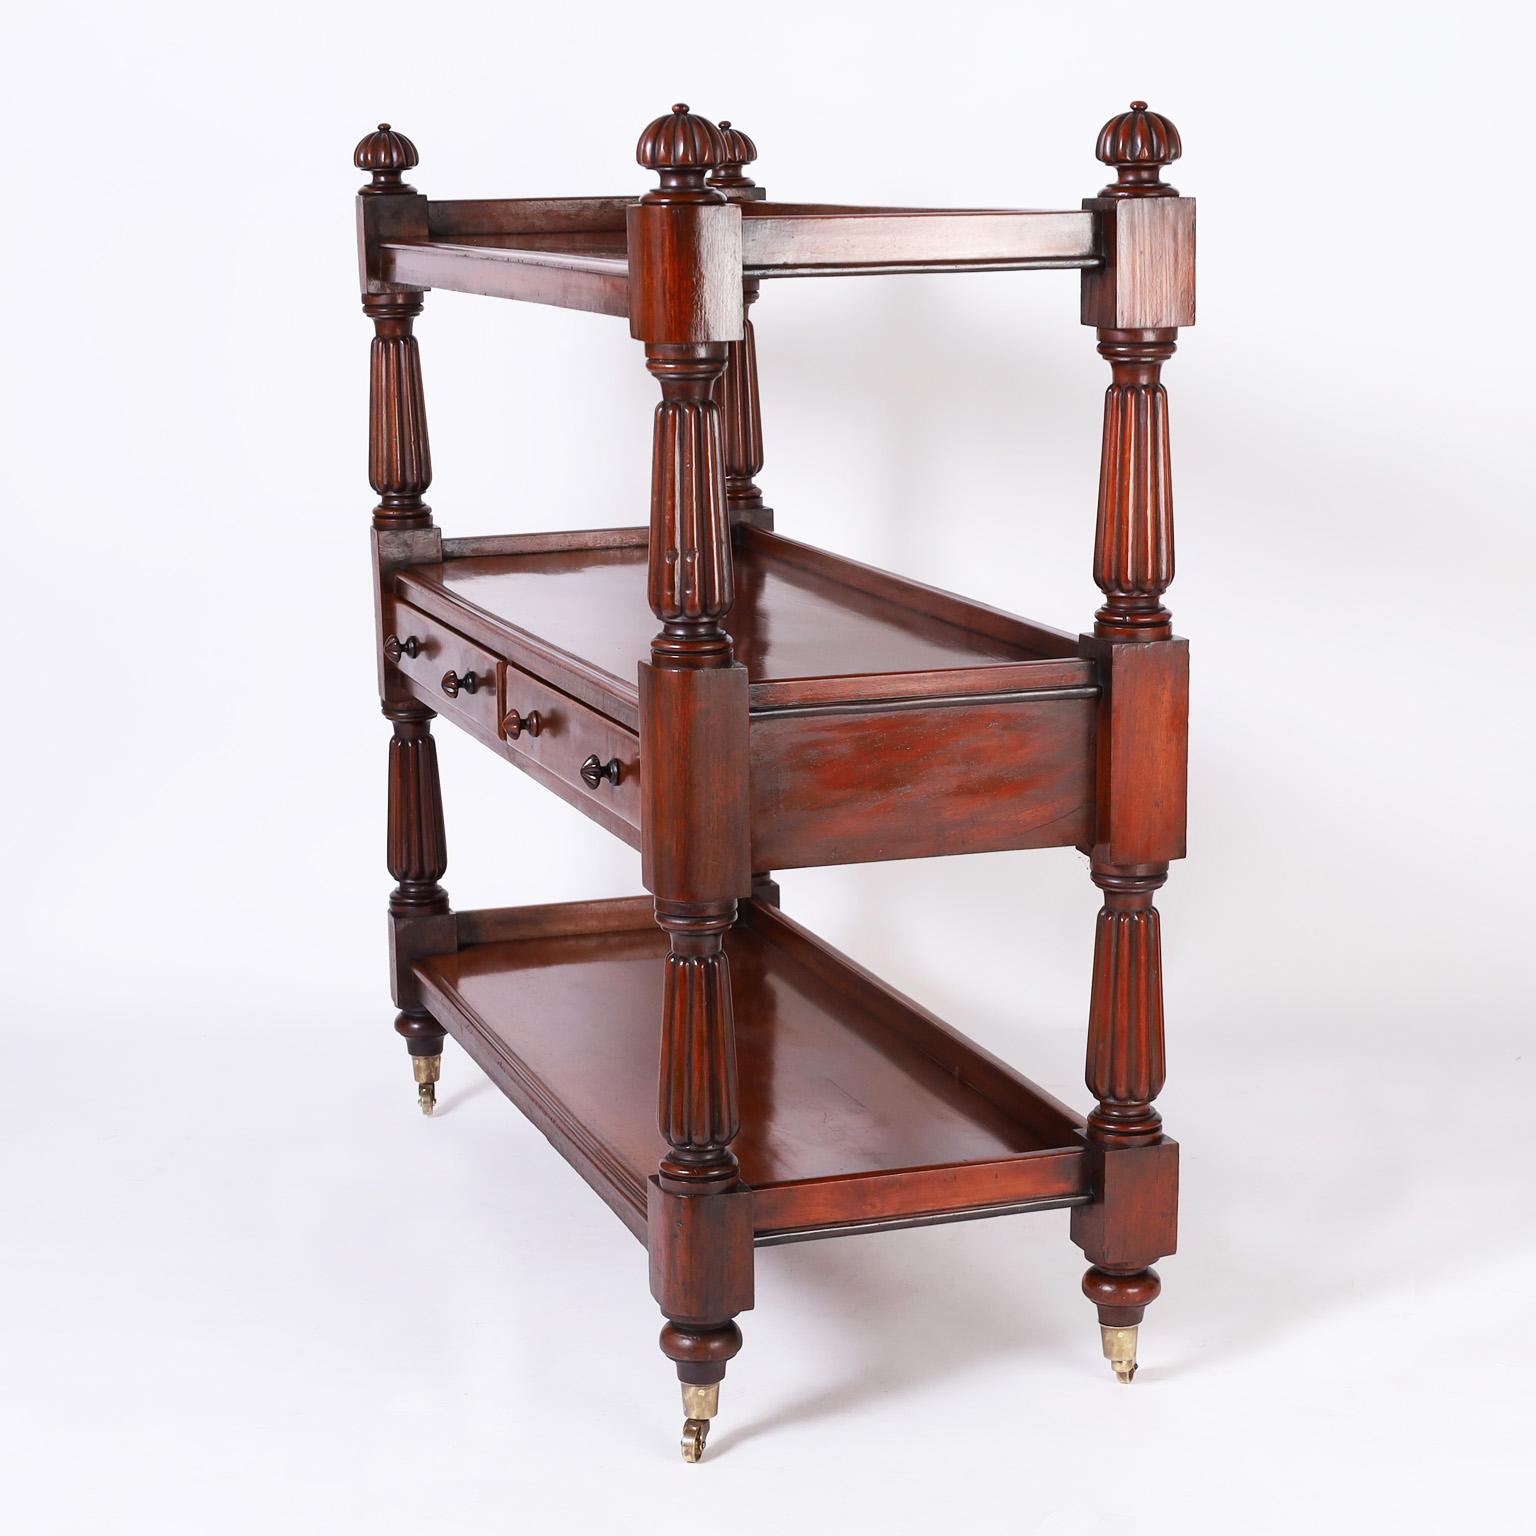 British Colonial Three Tiered Rolling Server or Etagere